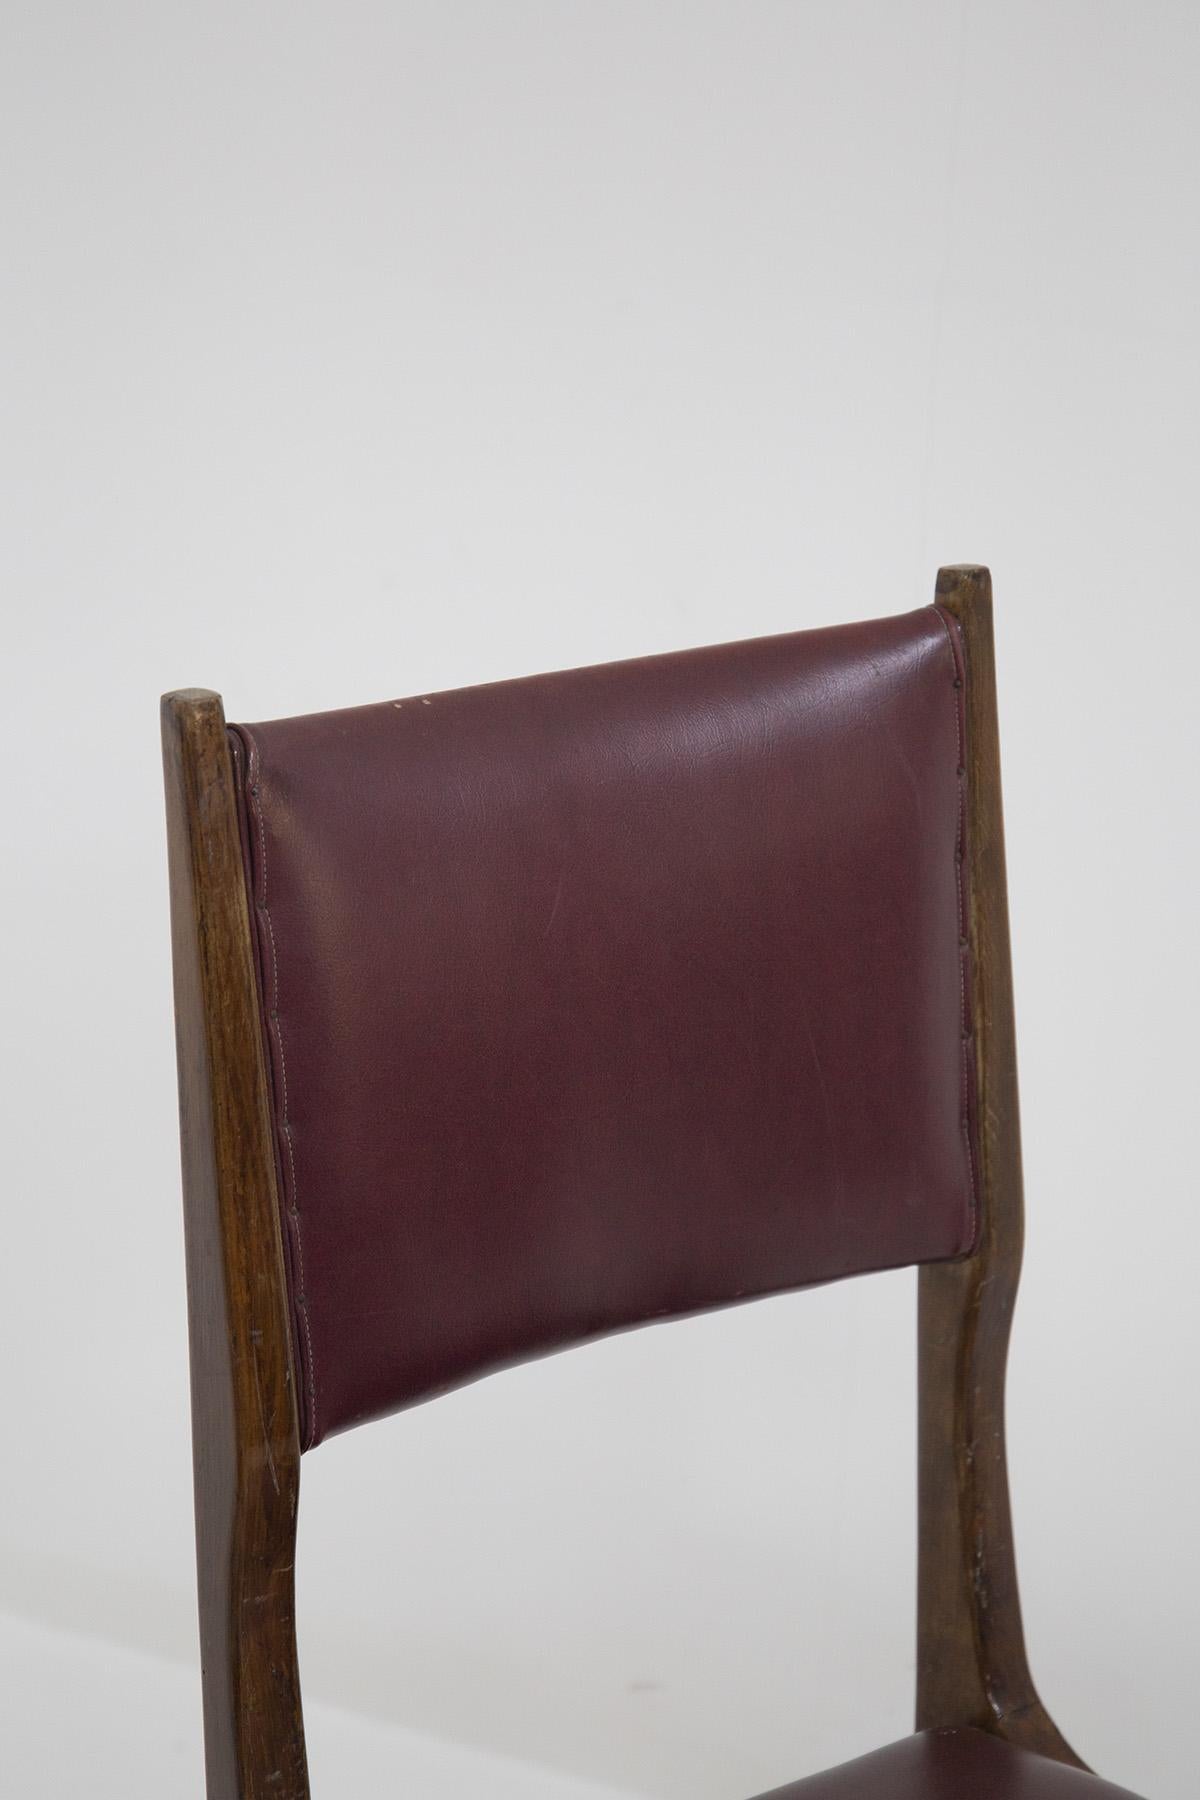 The set of vintage chairs from the ‘50s are designed by Carlo de Carli and made by fine Italian manufacturer. The chairs are solid, made in wood with rigid lines. While the seat and back rest have their original bordeaux leather.
This very